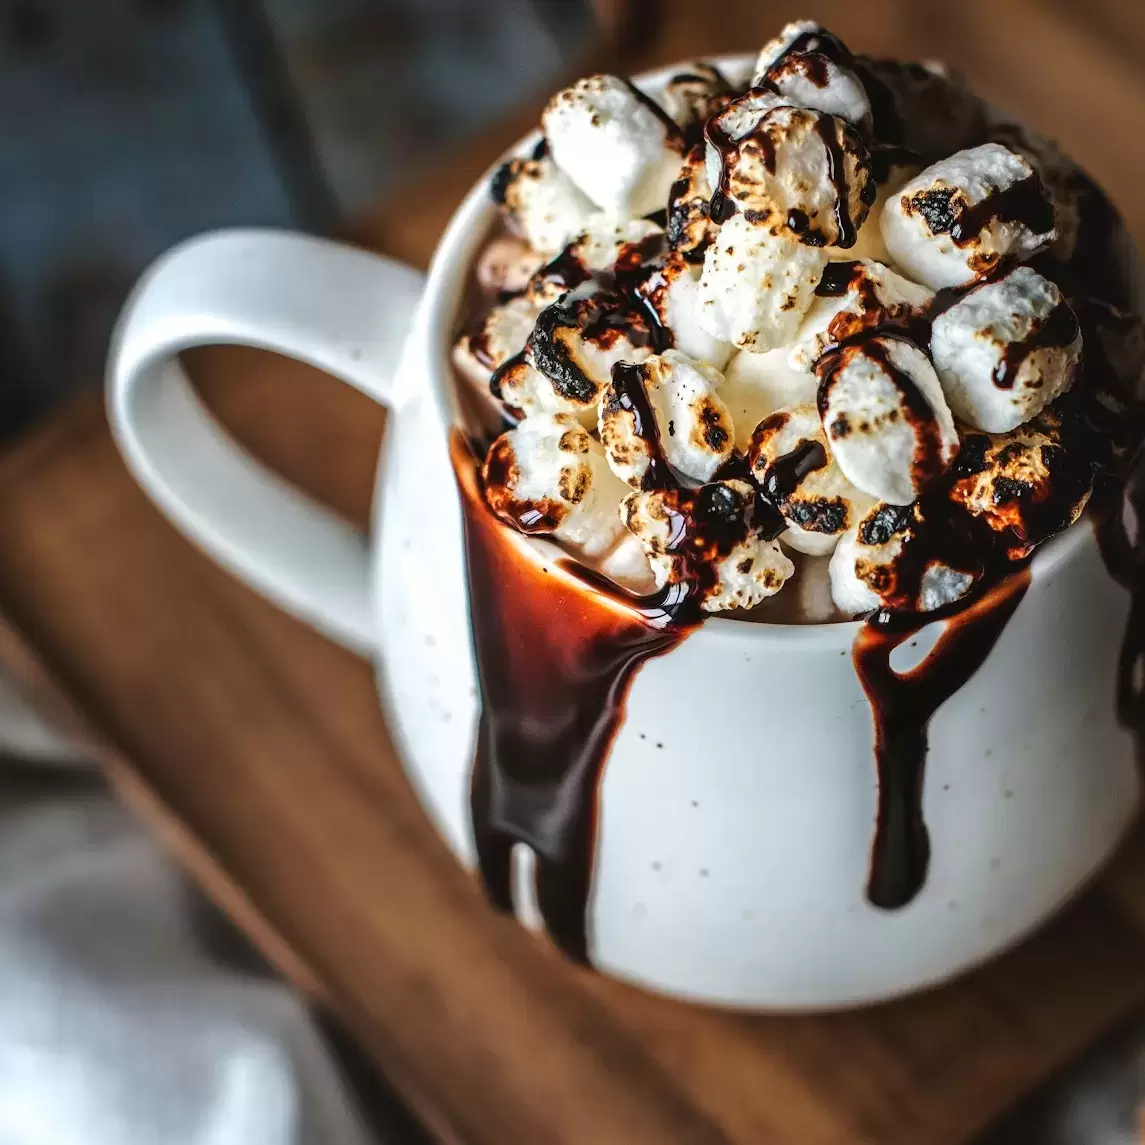 mug of overflowing hot chocolate with loads of marshmallows drizzled in chocolate